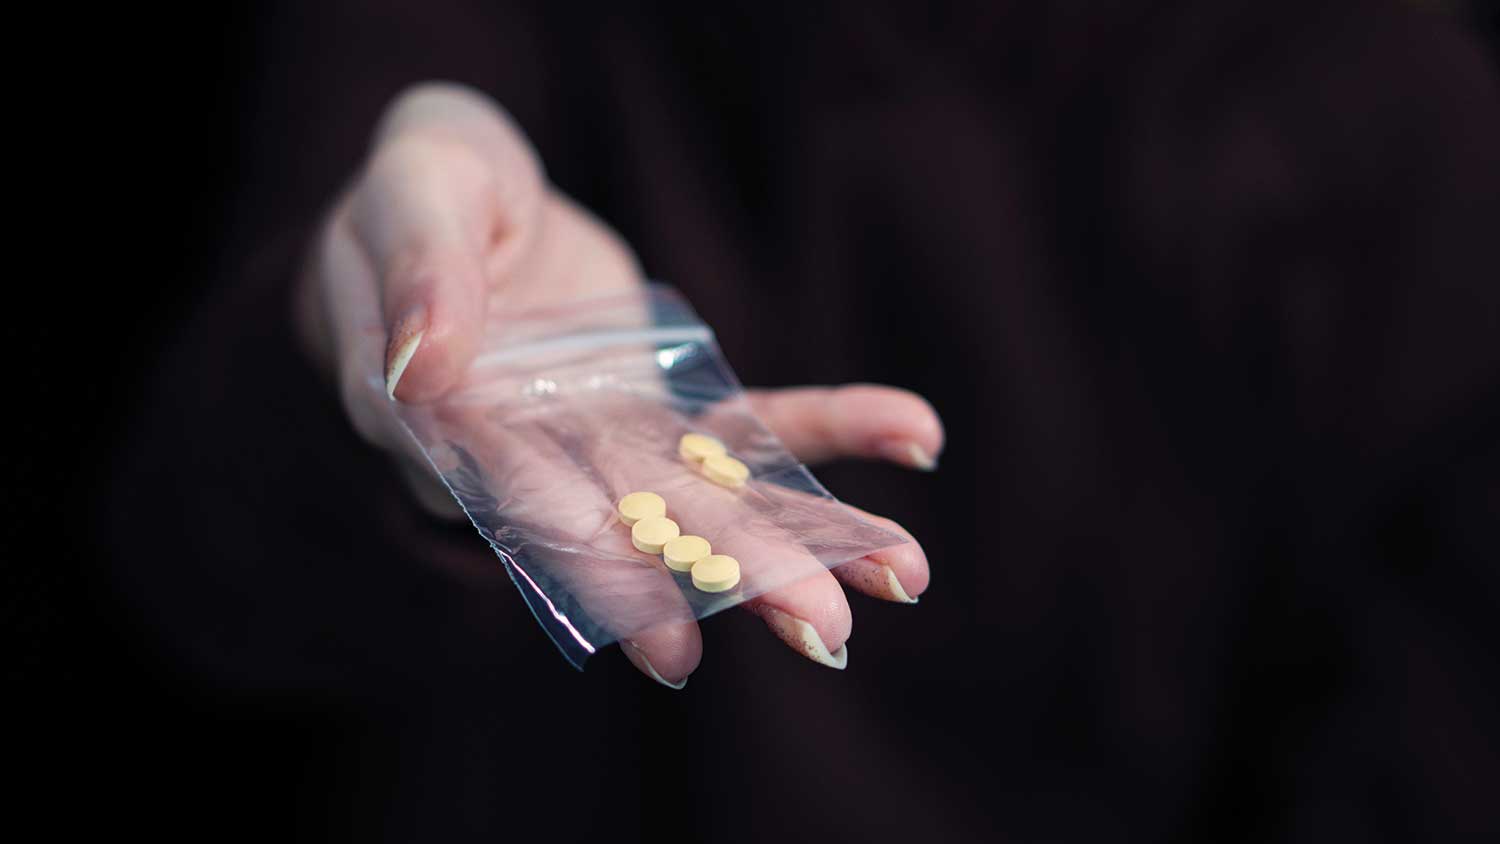 Six yellow pills in a clear plastic bag, held by a hand, the background is dark and all we see is the hand, bag and pills.